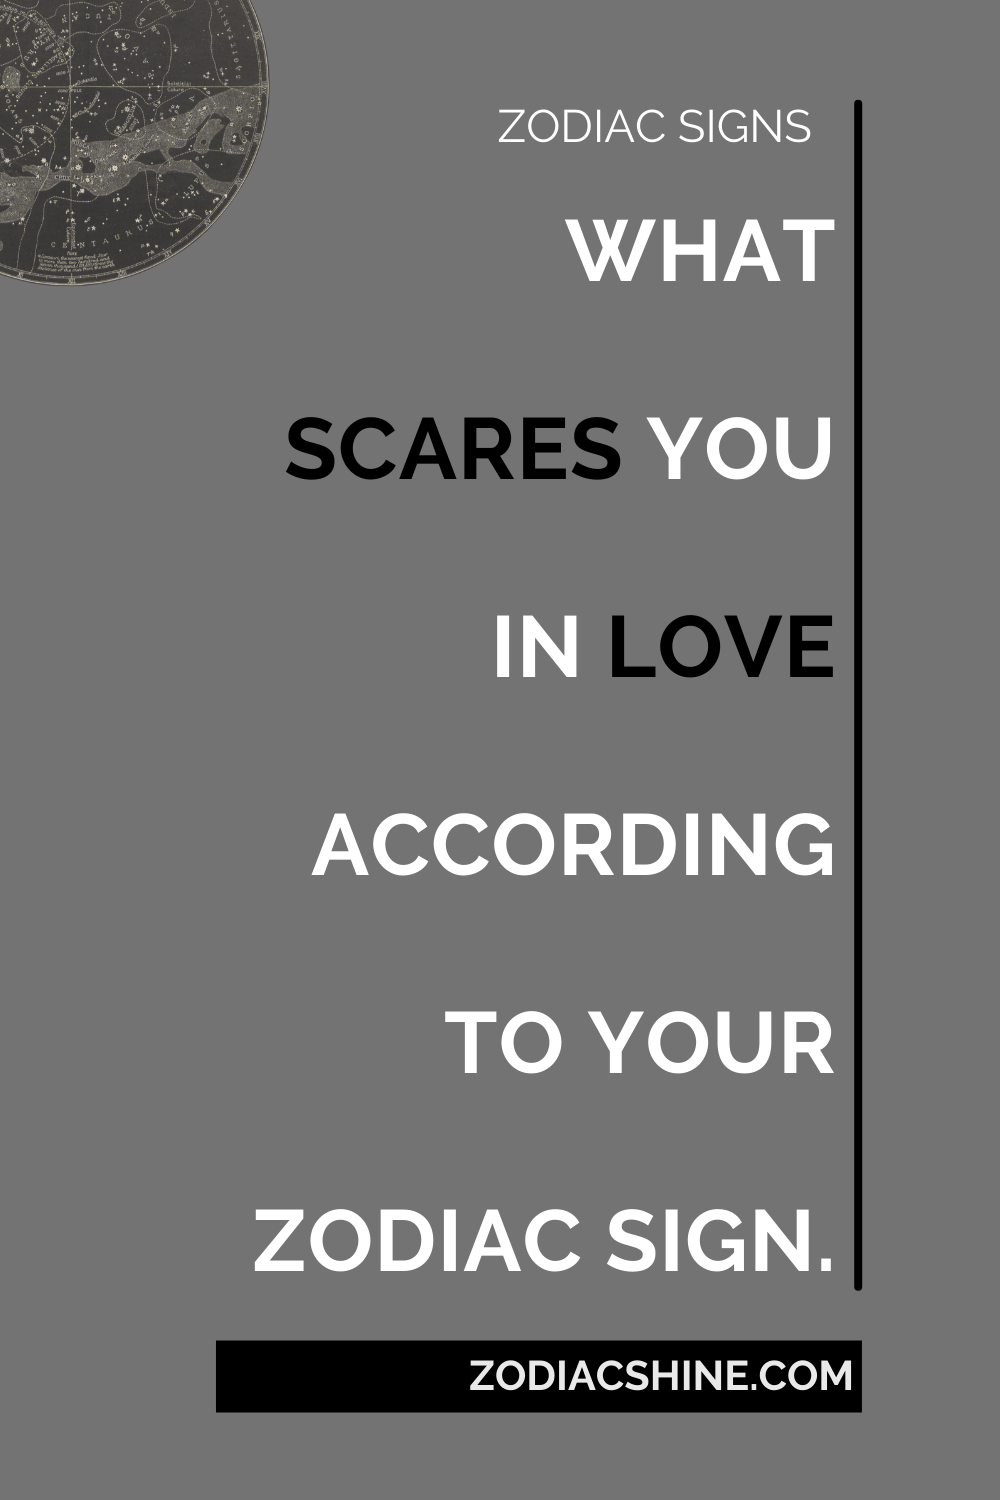 WHAT SCARES YOU IN LOVE ACCORDING TO YOUR ZODIAC SIGN.